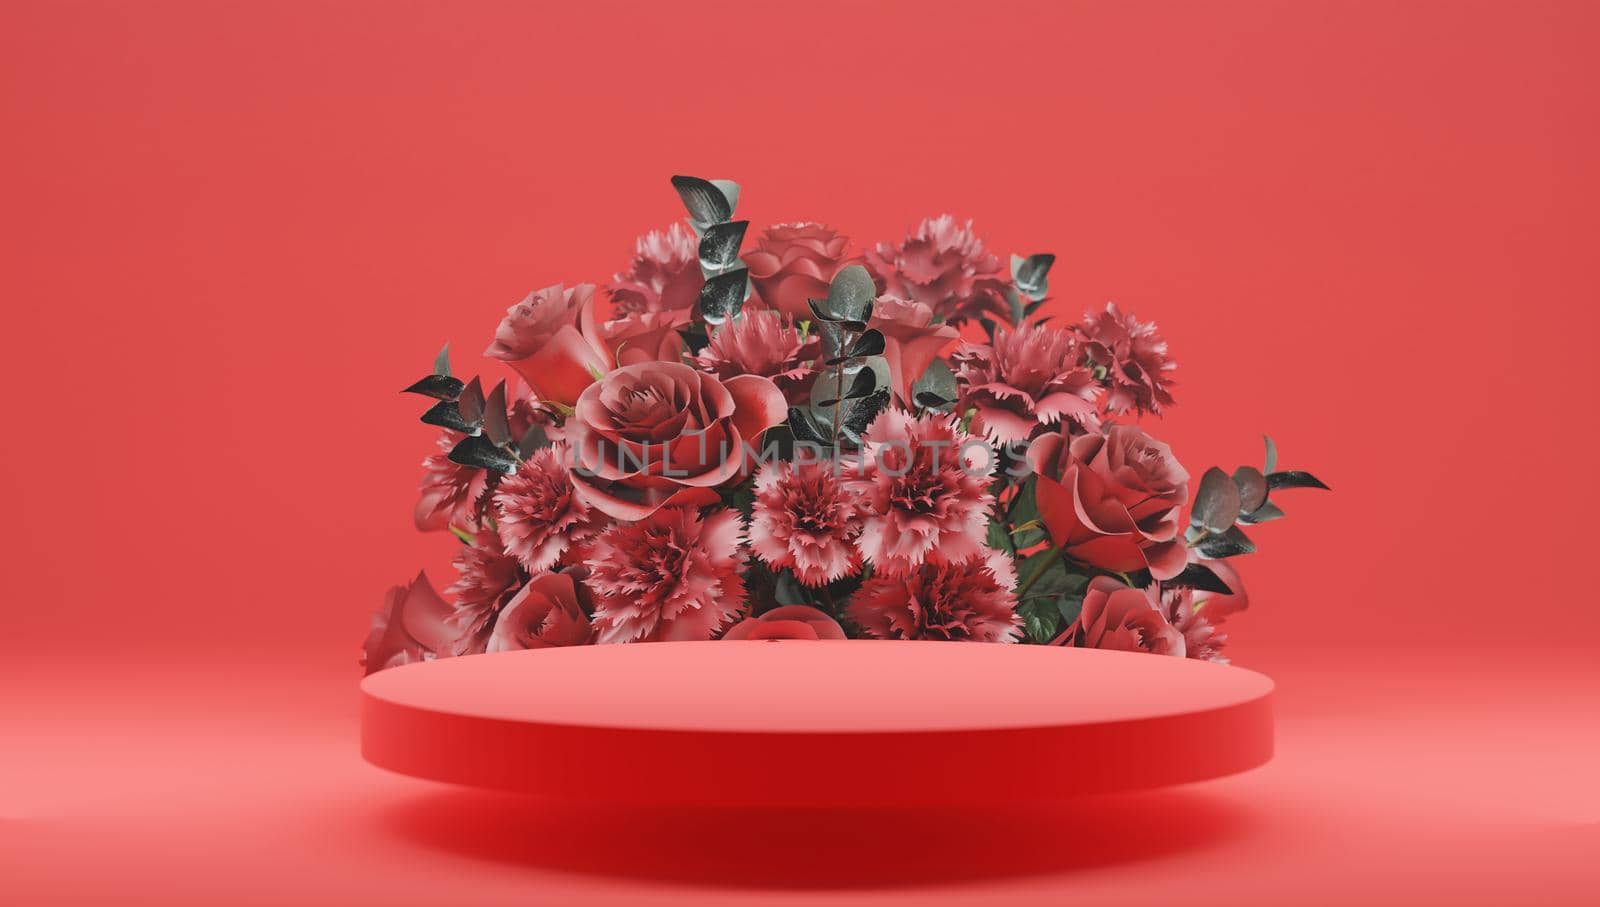 3D rendering rose flower background red color with geometric shape podium for product display, minimal concept, Premium illustration pastel floral elements, beauty, cosmetic, valentines day